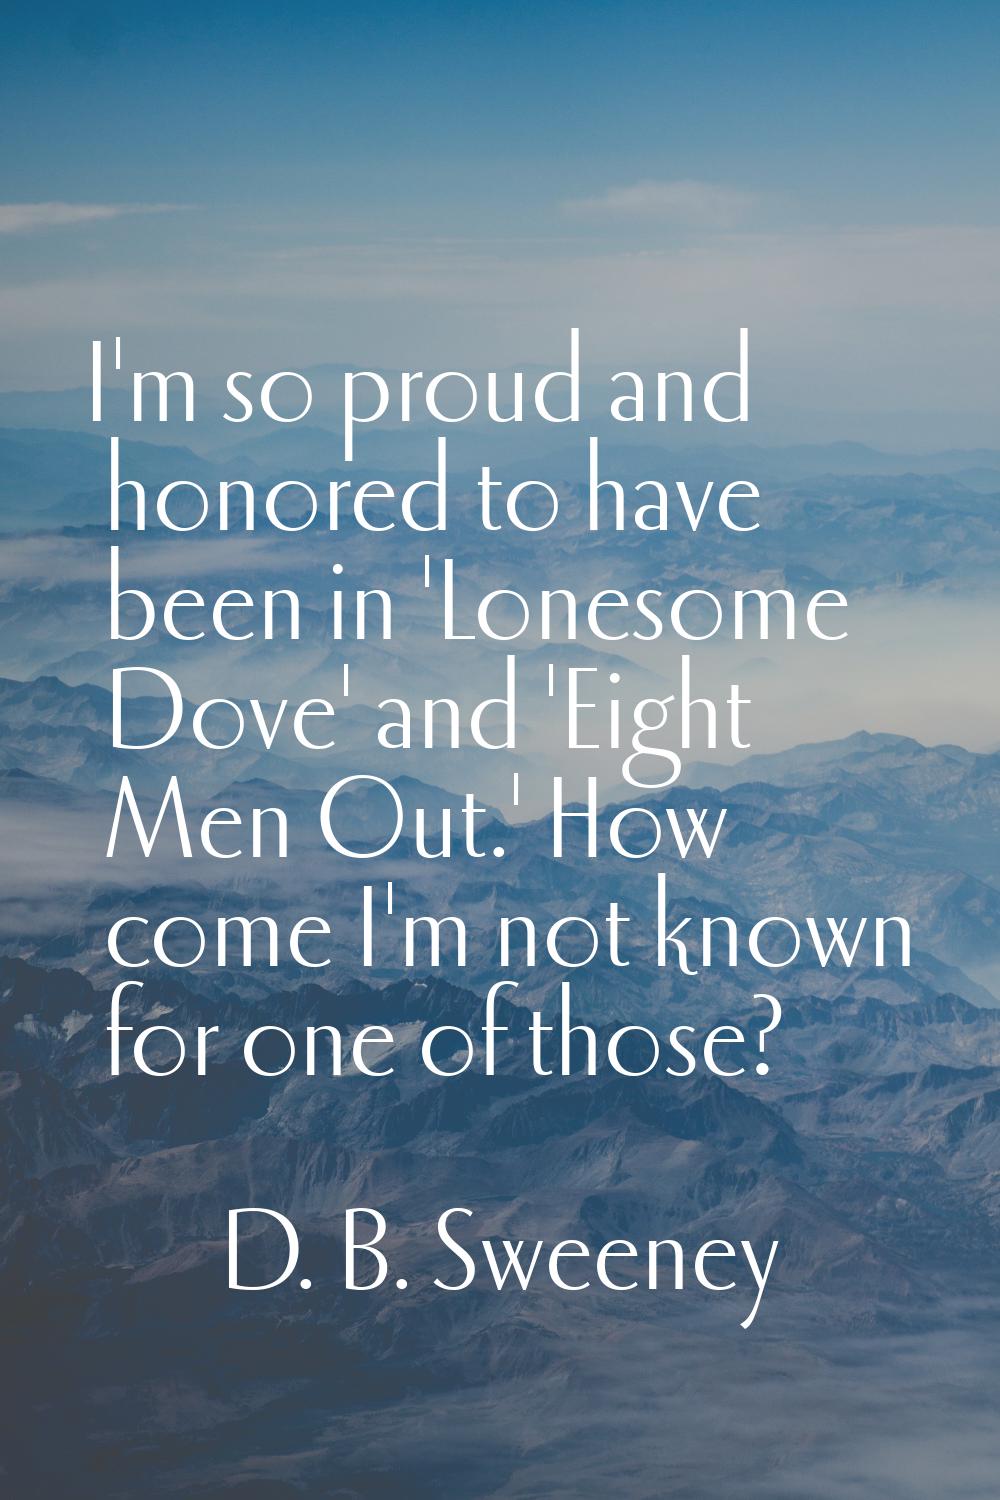 I'm so proud and honored to have been in 'Lonesome Dove' and 'Eight Men Out.' How come I'm not know